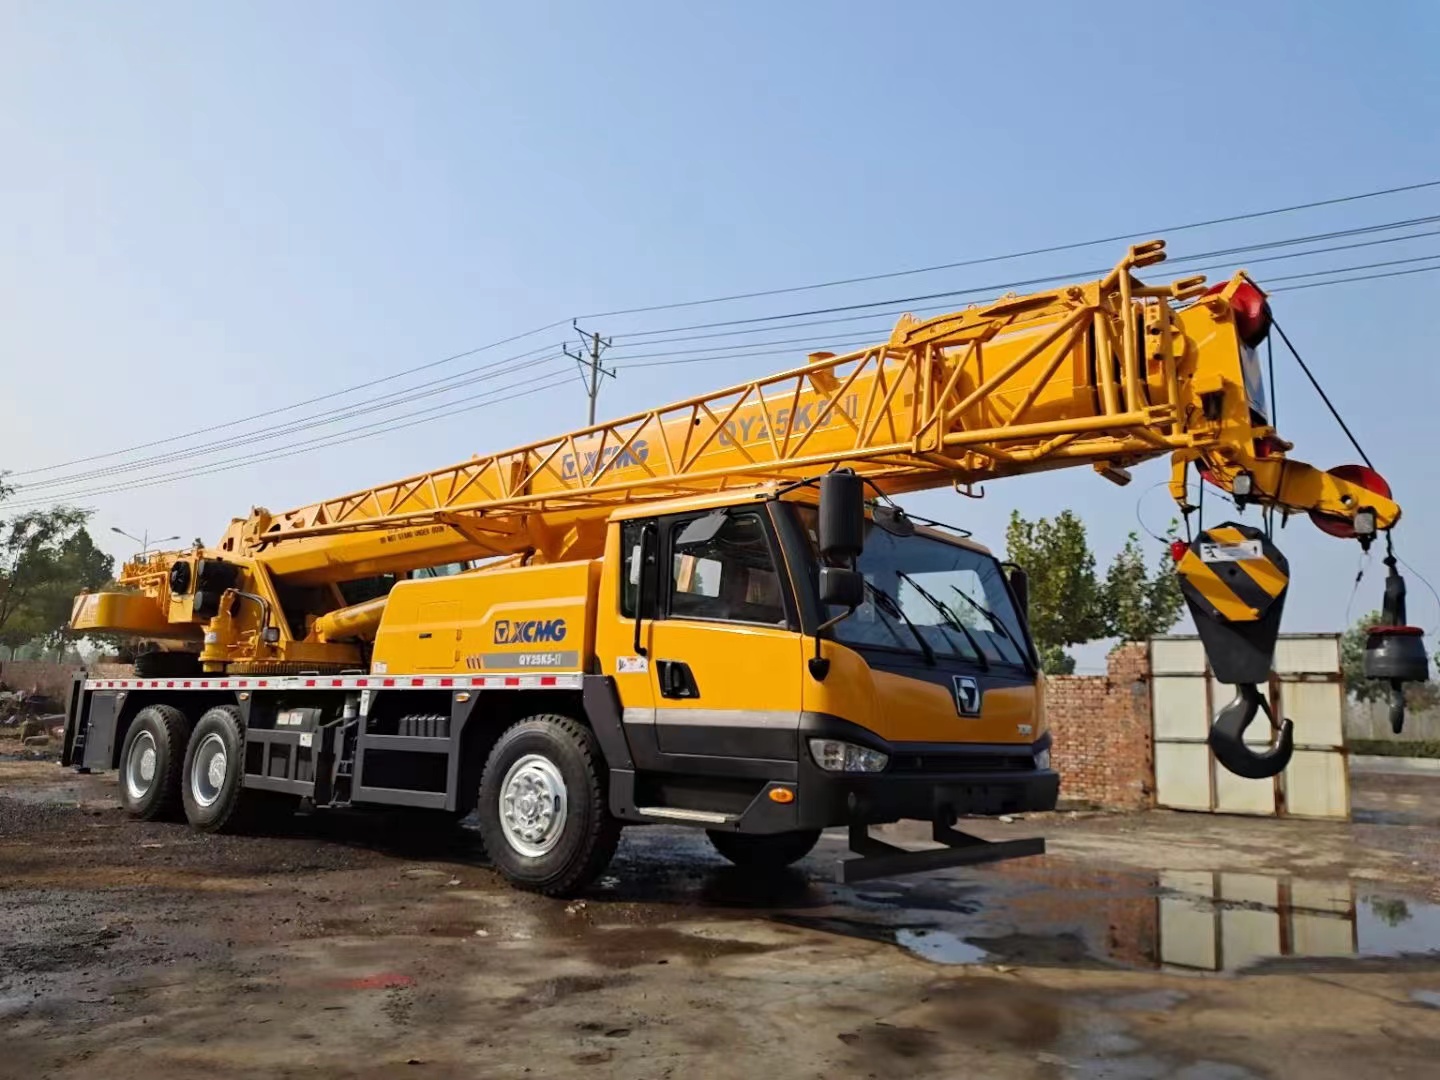 Used crane XCMG QY25k5 With 25 tons lifting capacity For lifting various large-scale projects 4